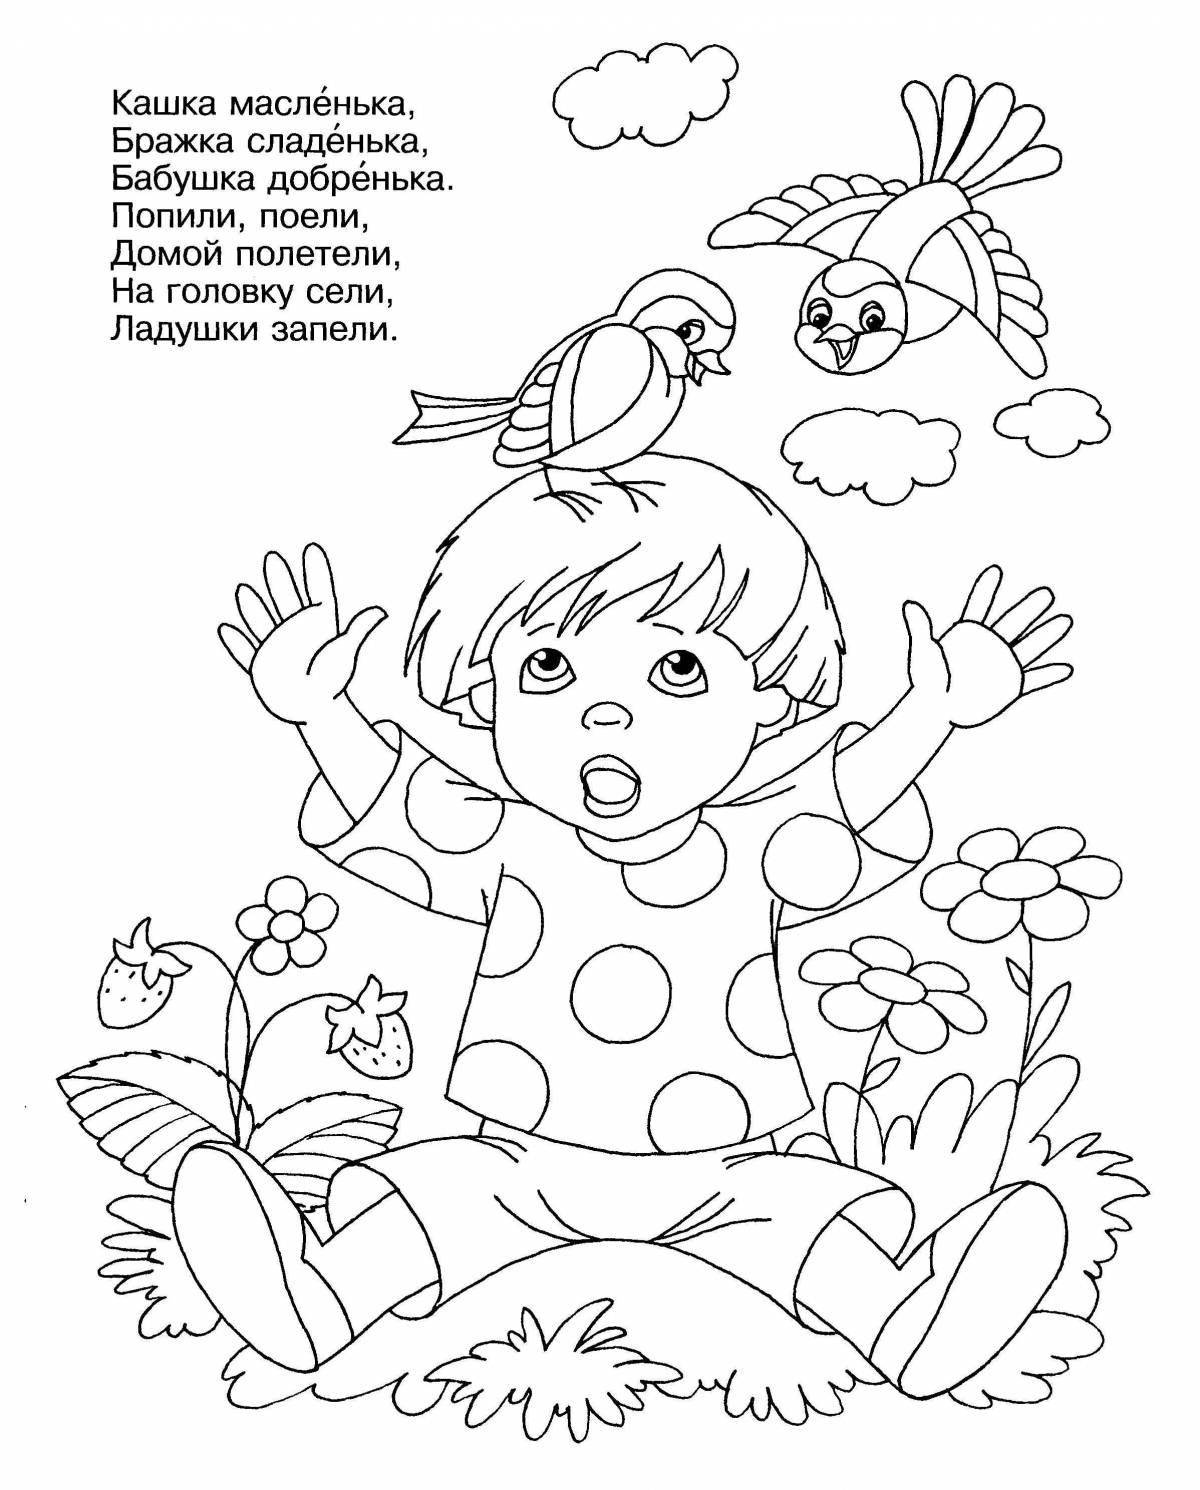 Great poetry coloring book